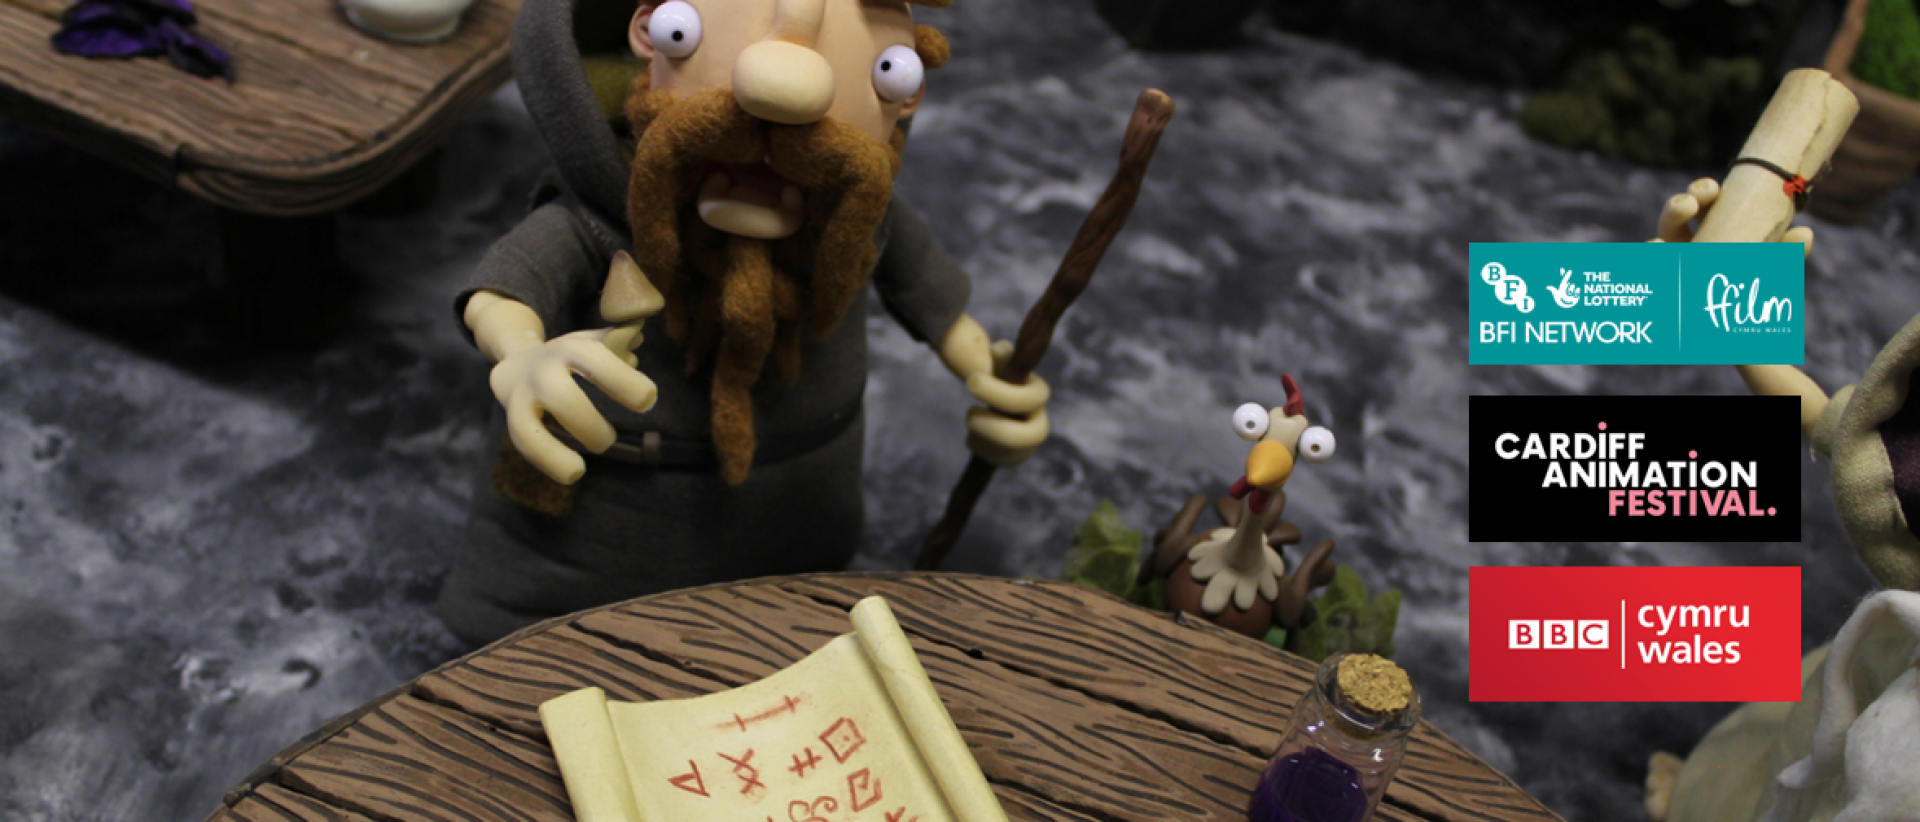 a still from animated short film druids, featyuring a clay puppet of a druid with a walking stick